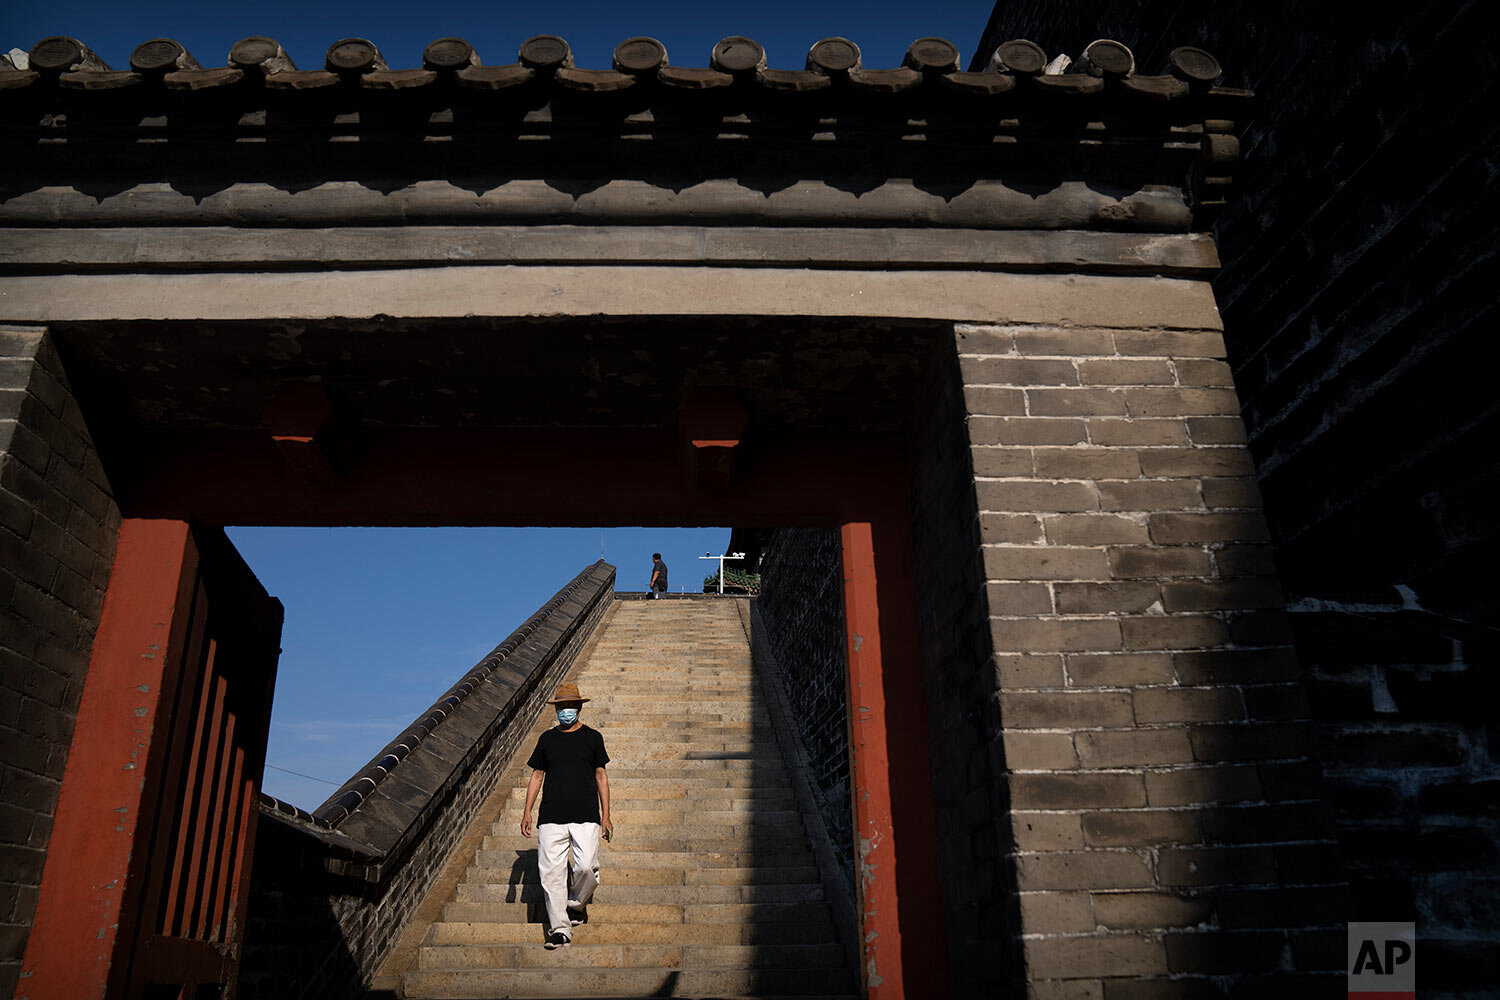  A man wearing a face mask to protect against COVID-19 walks down a flight of stairs at a park on a historic section of the old city wall in Beijing, Saturday, Aug. 28, 2021. (AP Photo/Mark Schiefelbein) 